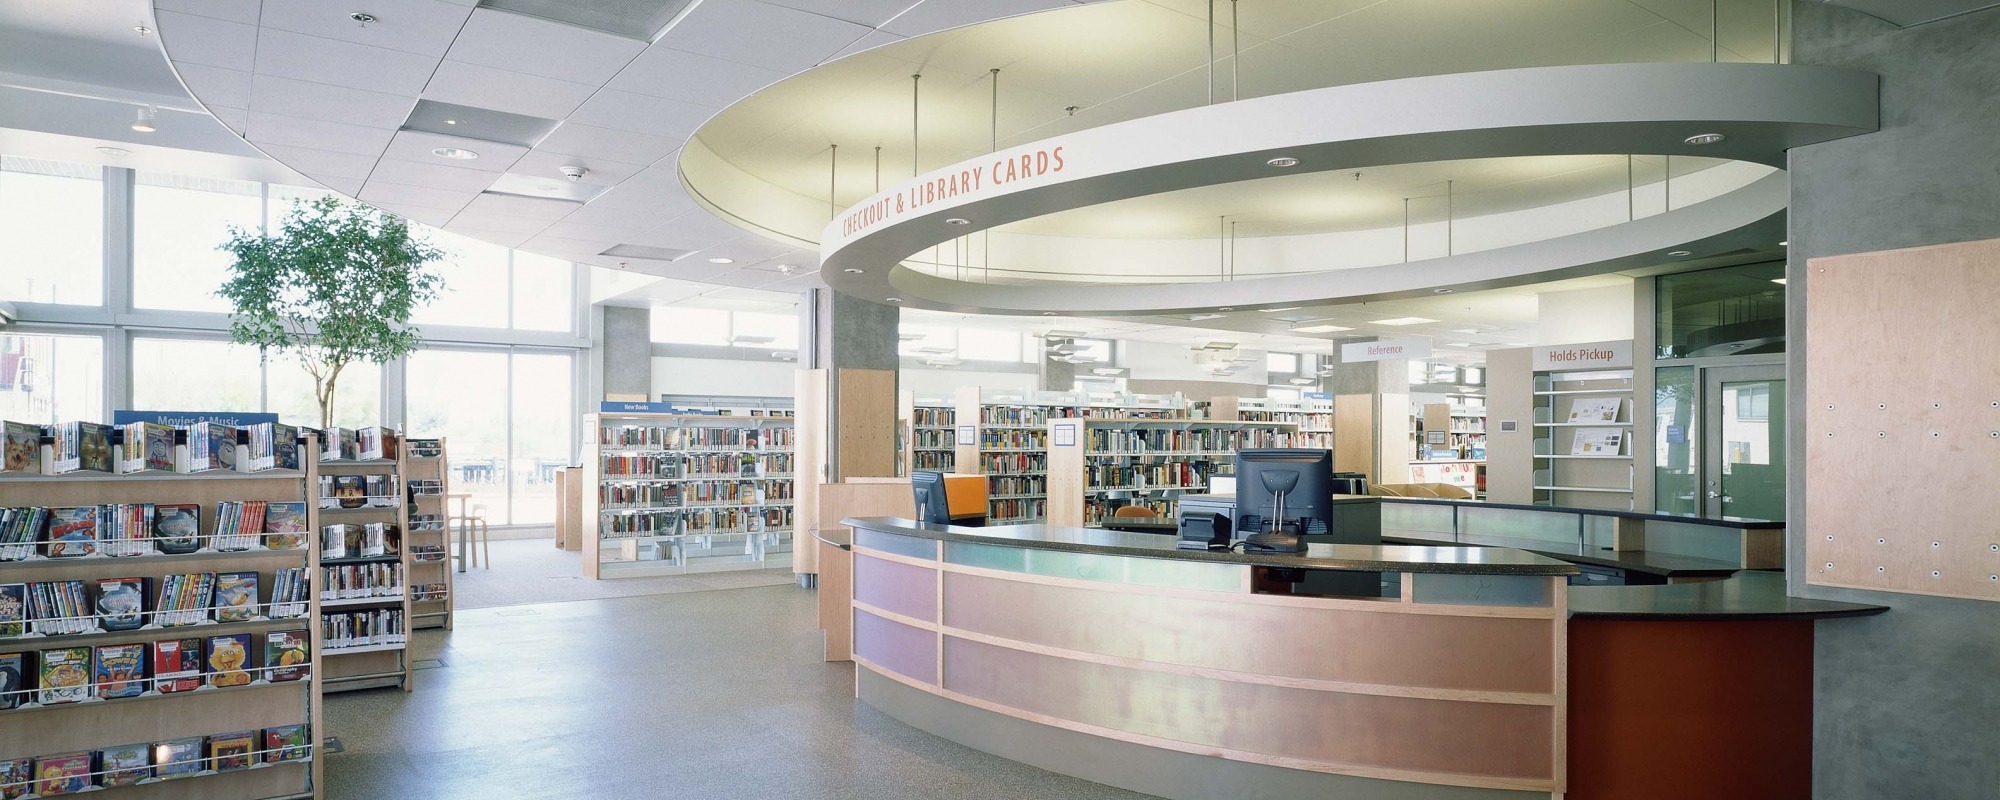 Mission Bay Branch Library